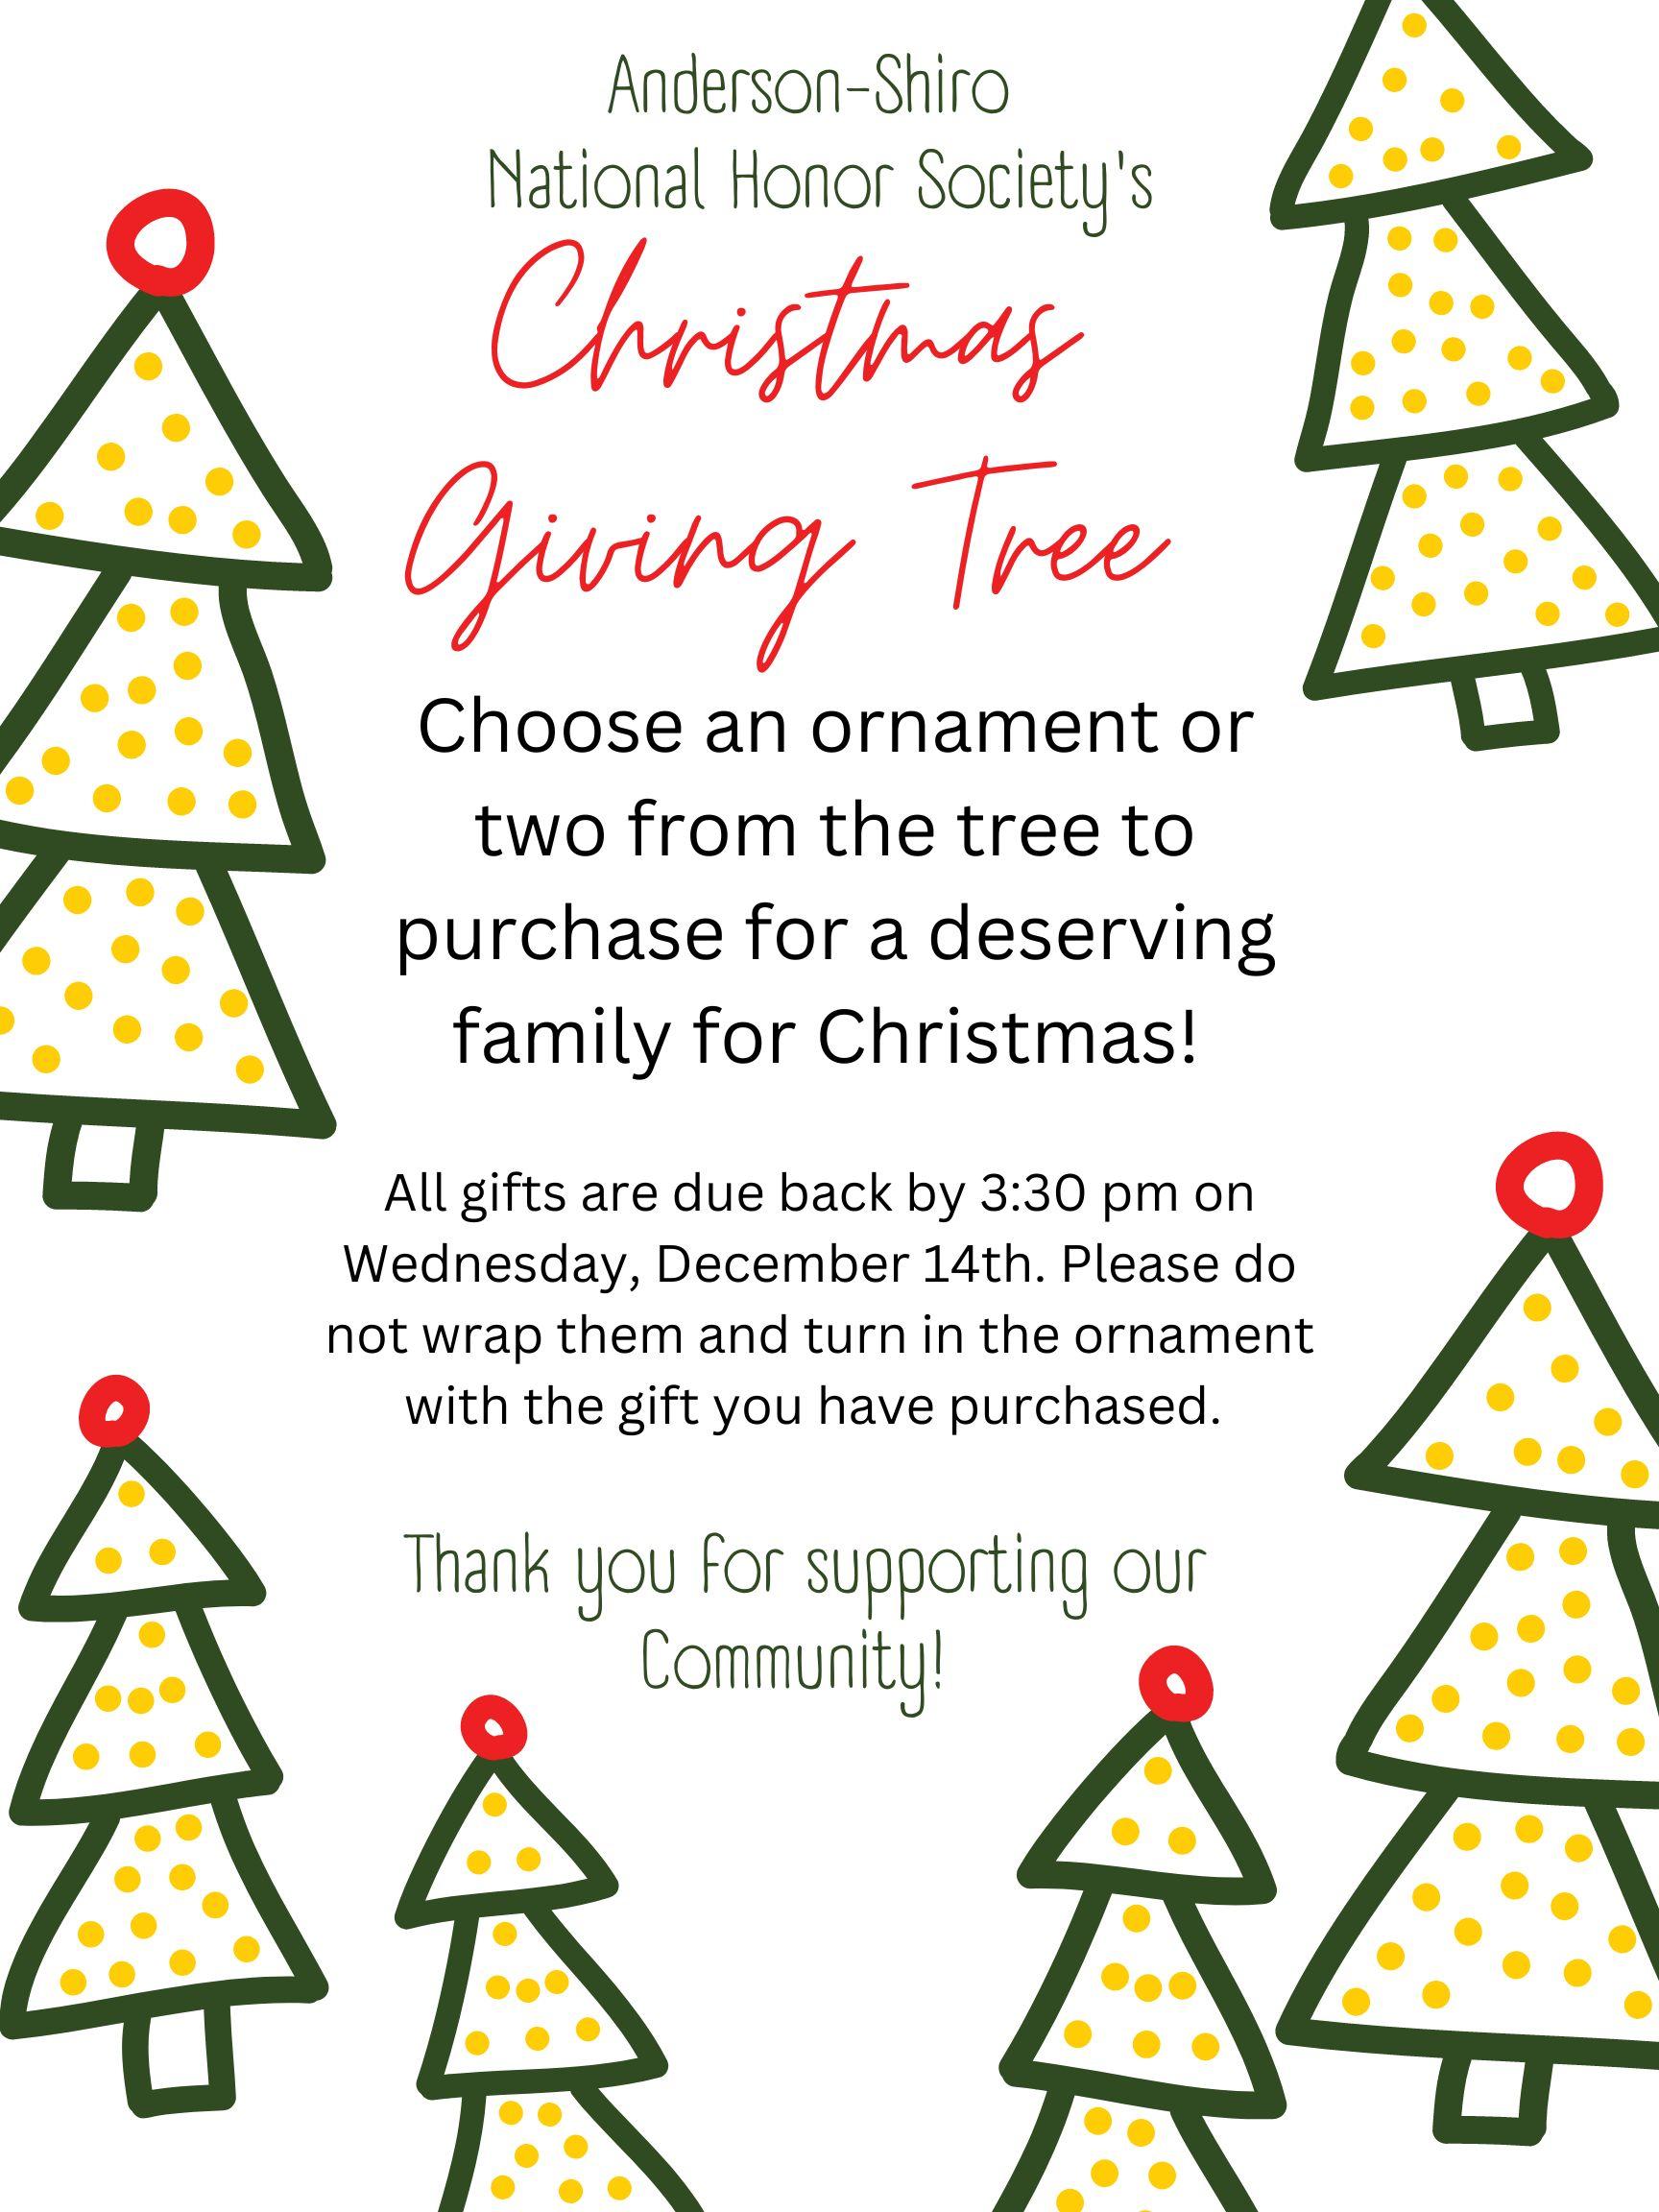 Giving Tree Flyer